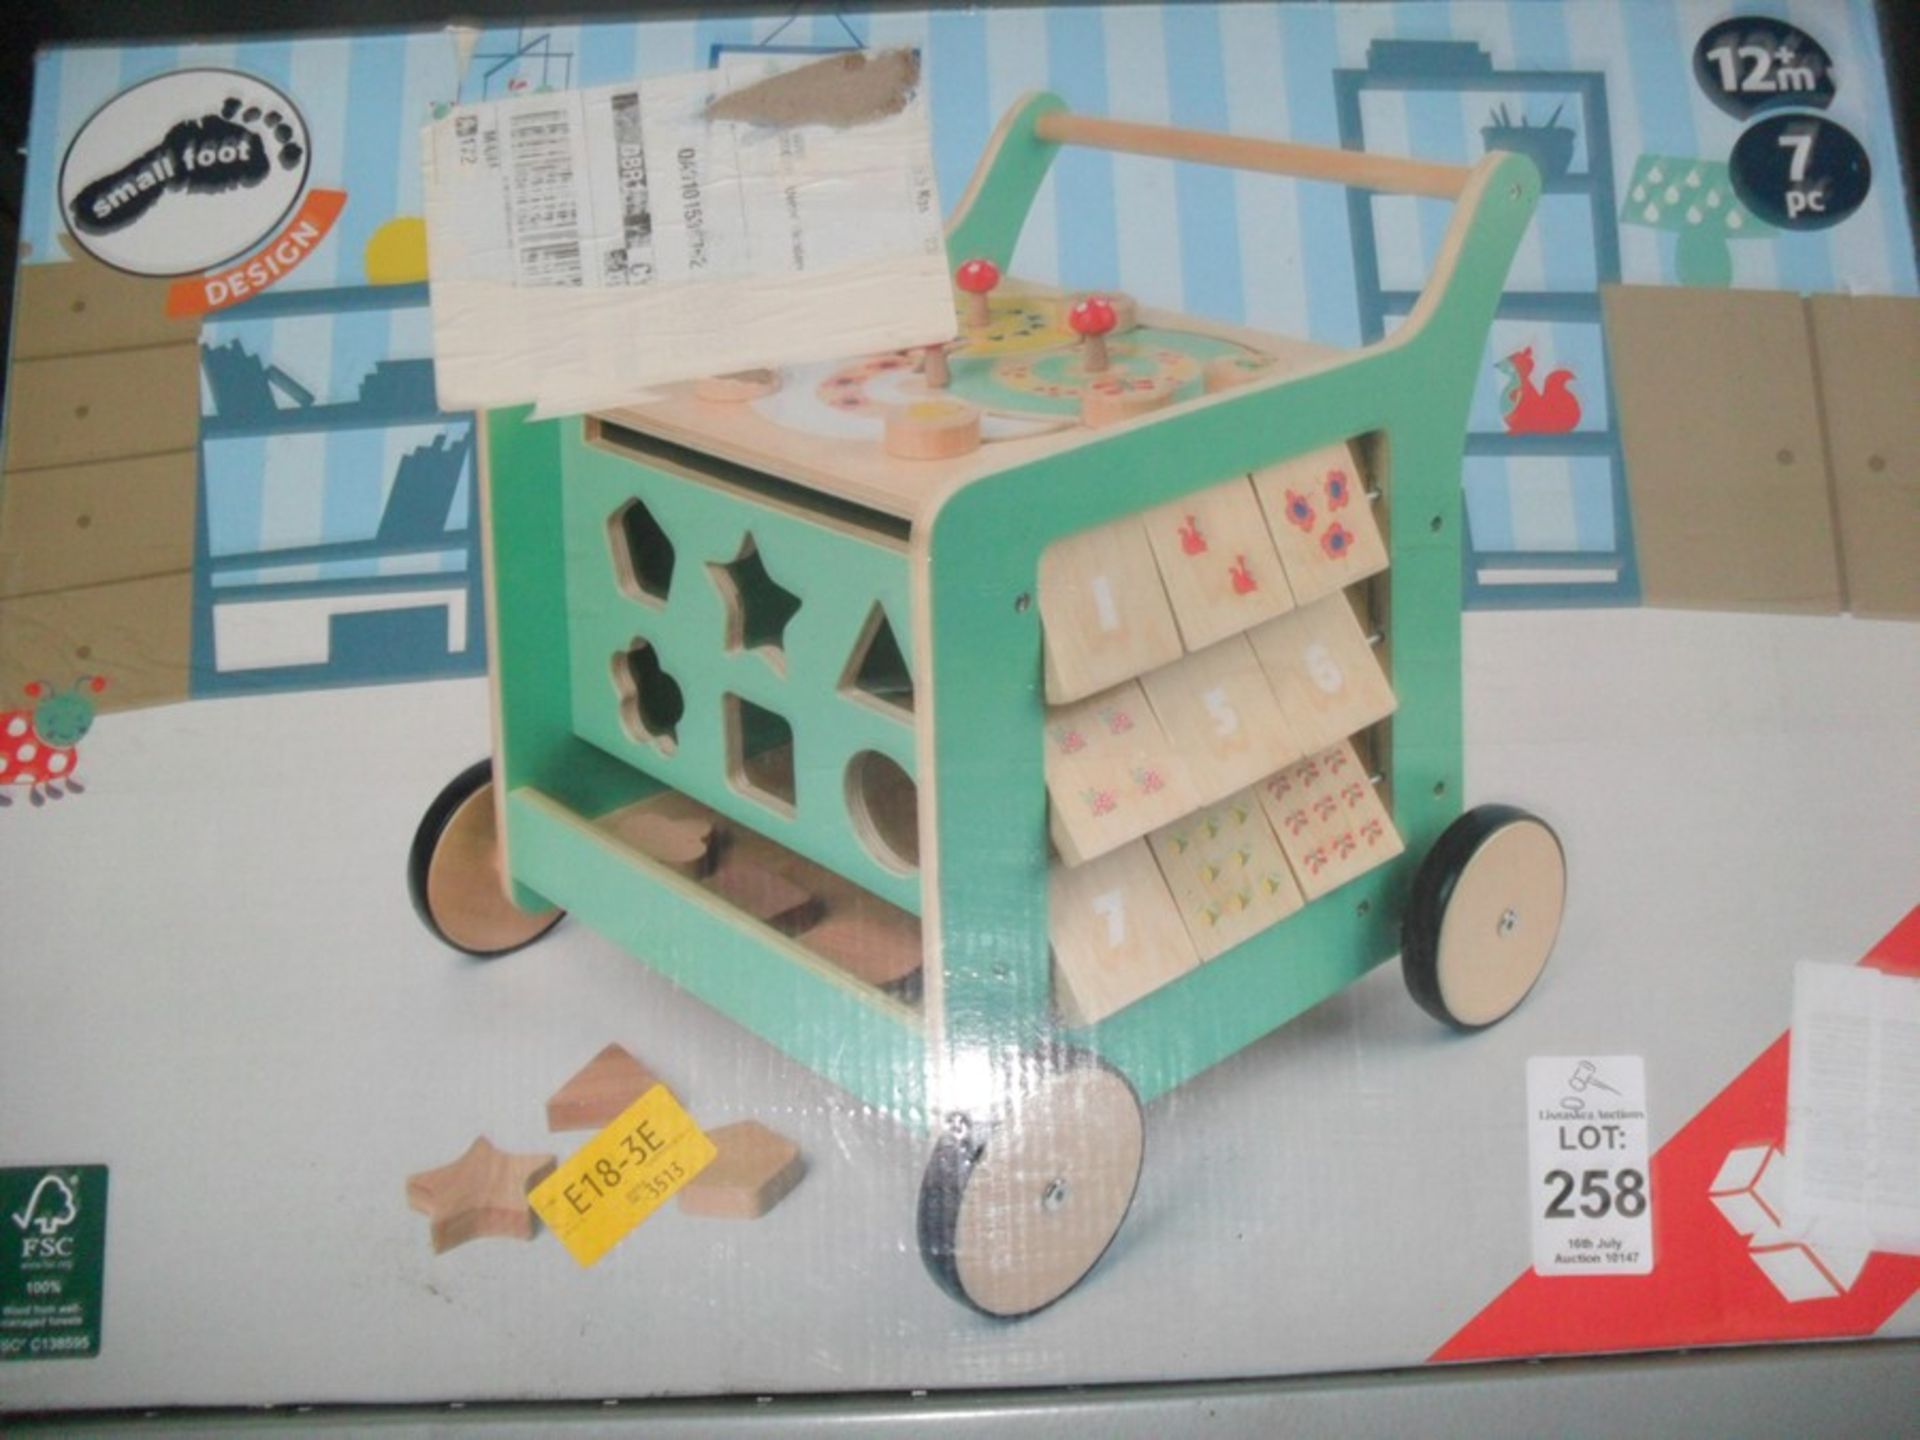 SMALL FOOT BABY PUSH ALONG LEARNING TROLLEY